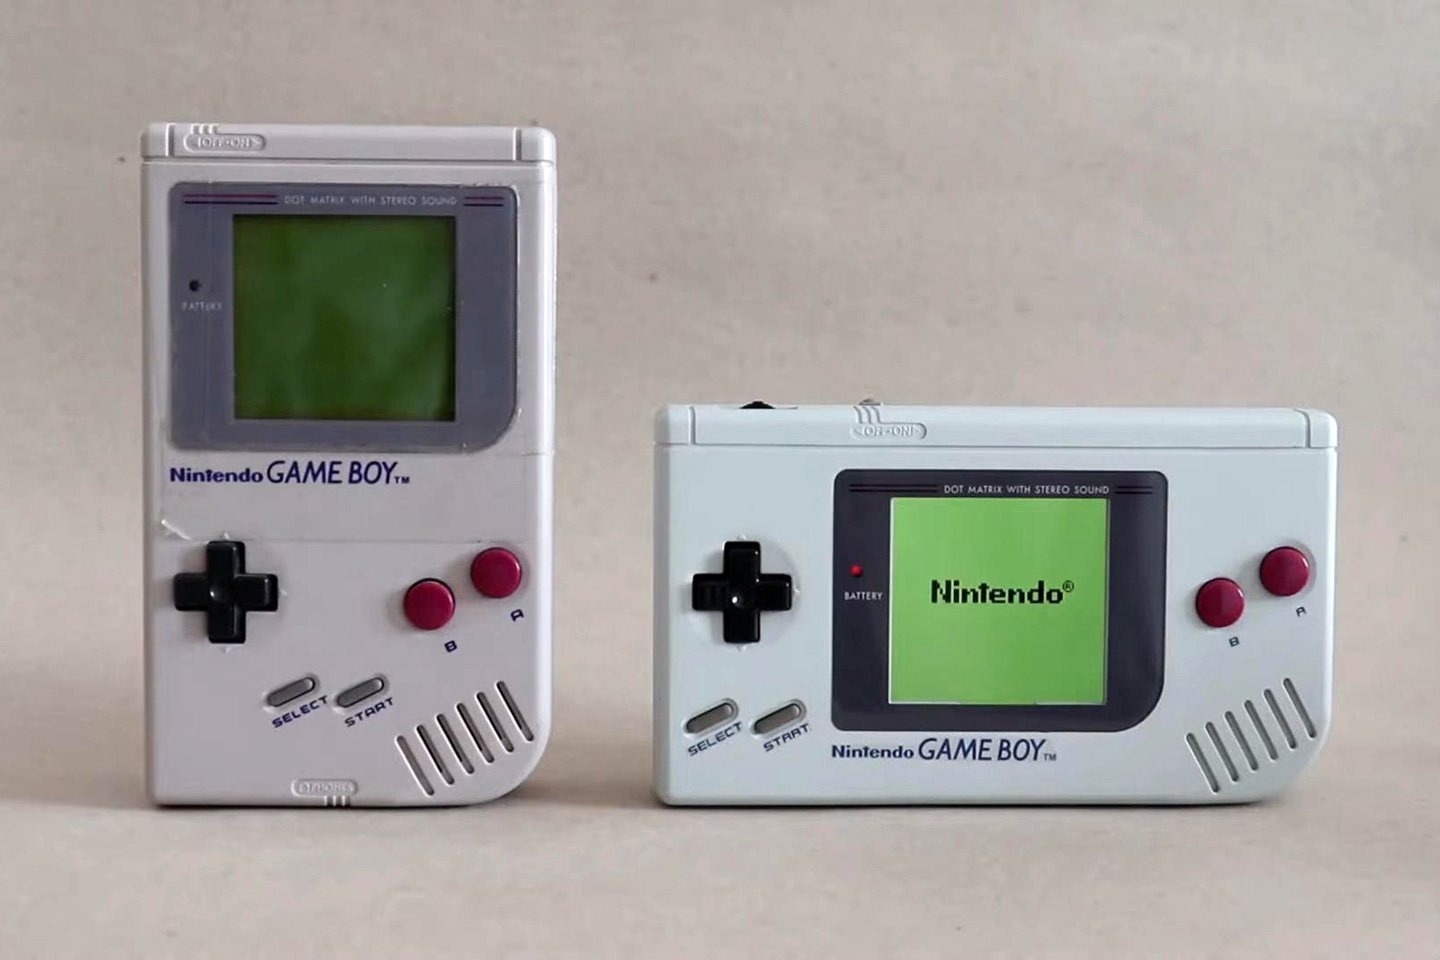 #This parallel-universe ‘landscape’ Game Boy Classic feels like the Nintendo Switch’s earliest ancestor